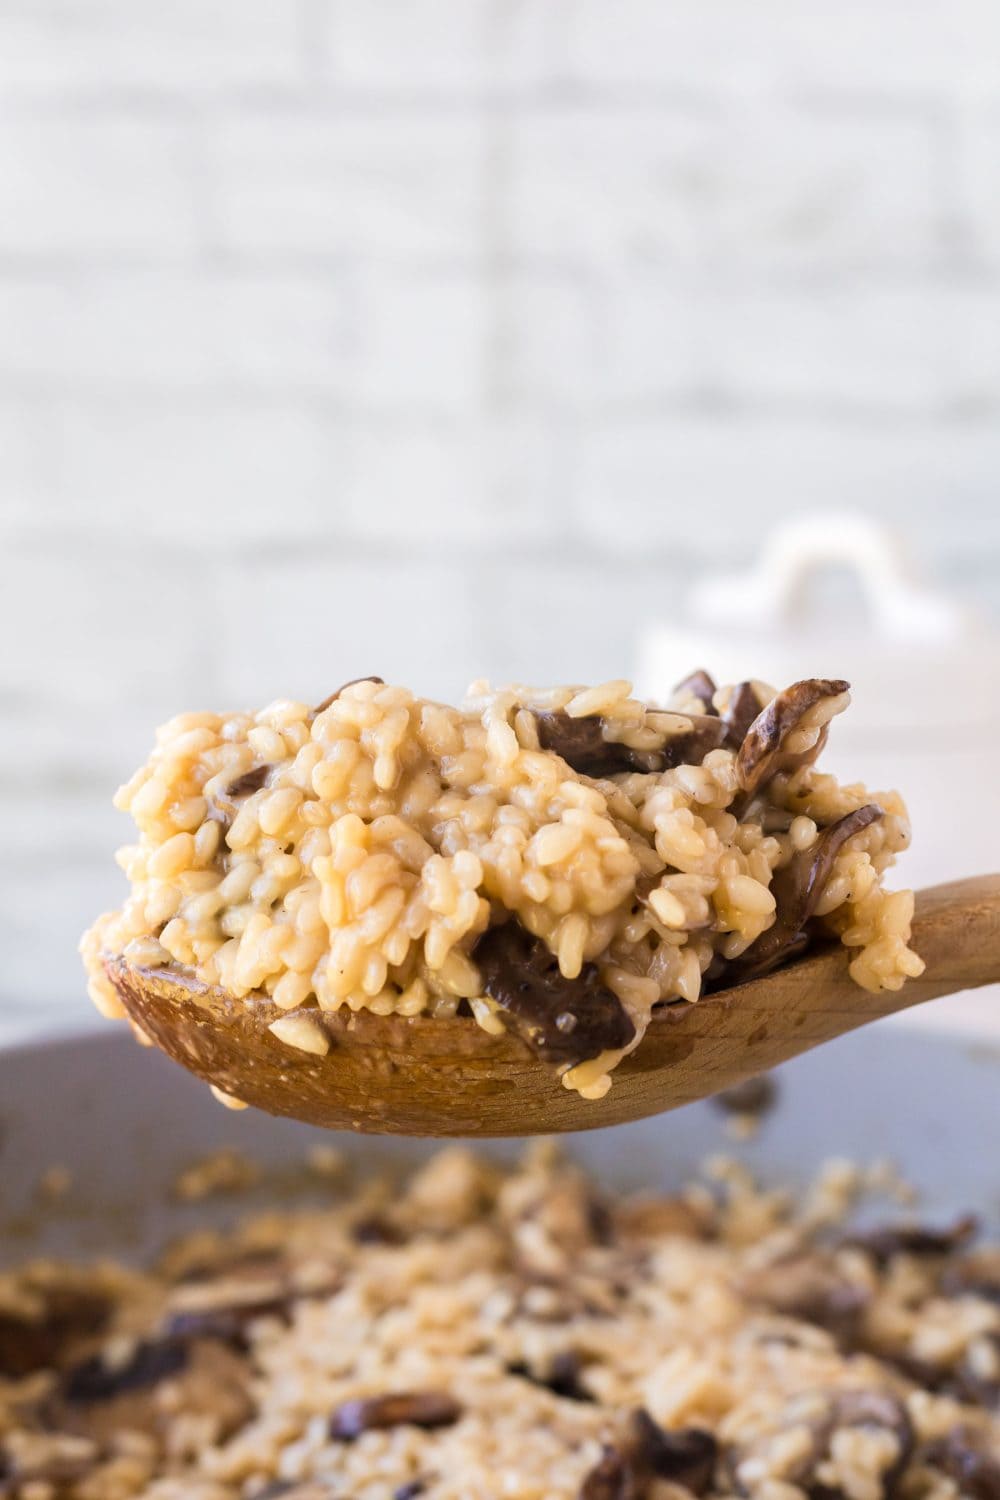 Spoonful of mushroom risotto.